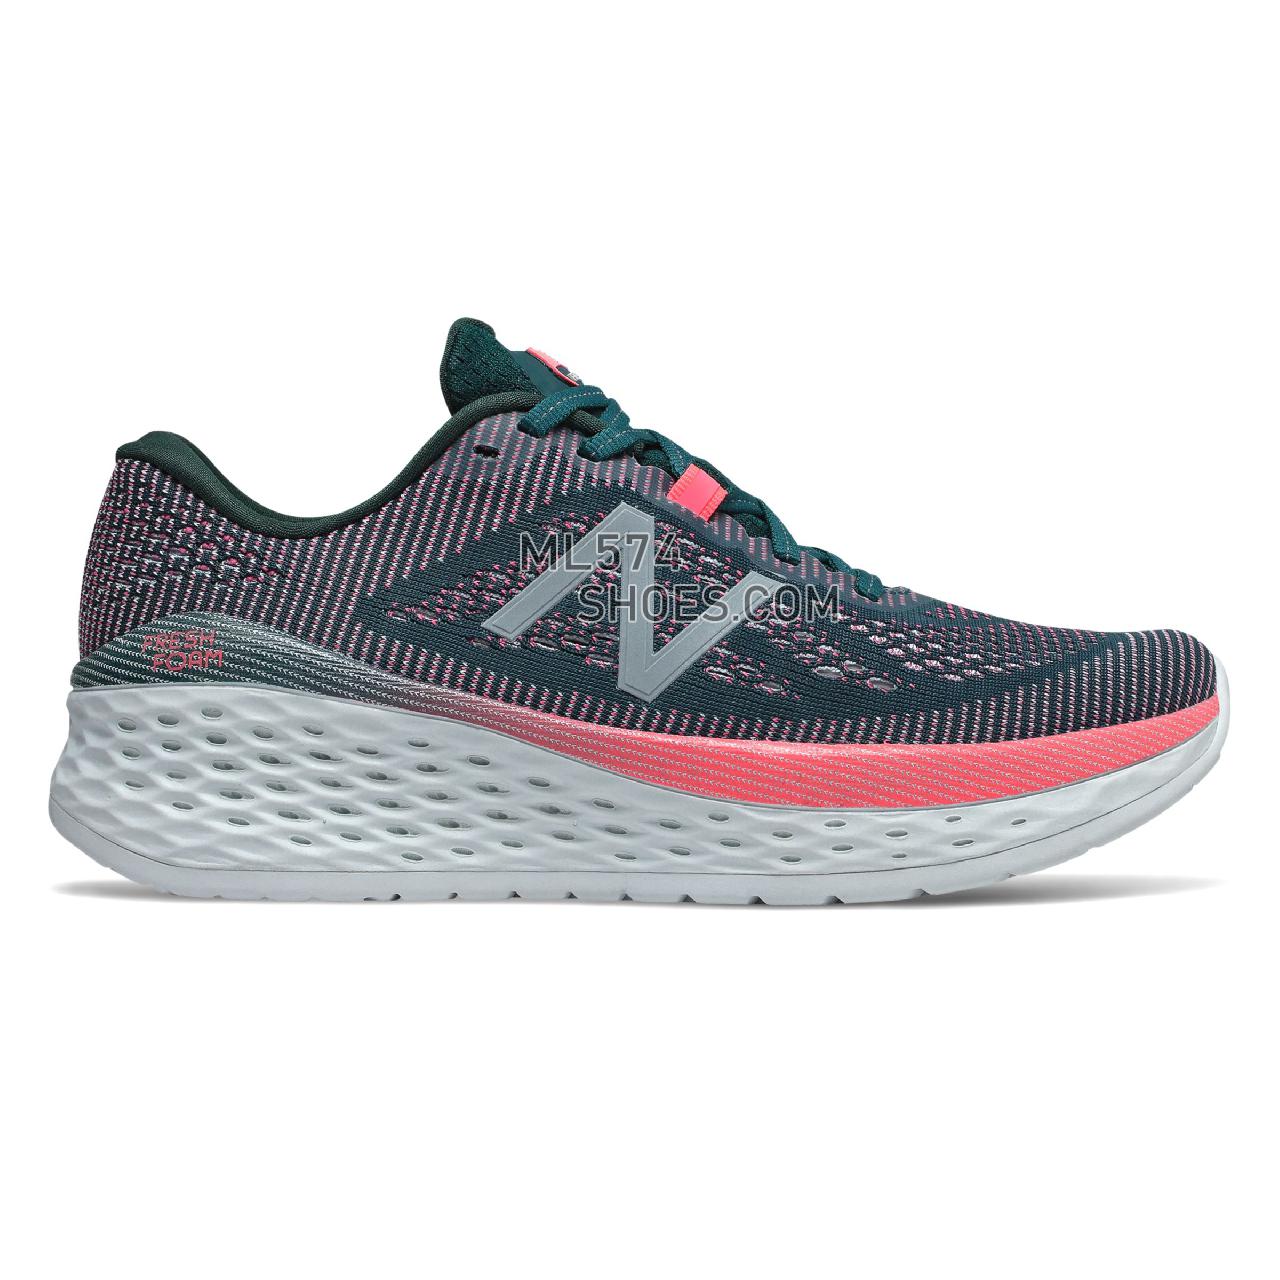 New Balance Fresh Foam More - Women's Neutral Running - Tropical Green with Guava and Winter Sky - WMORTL